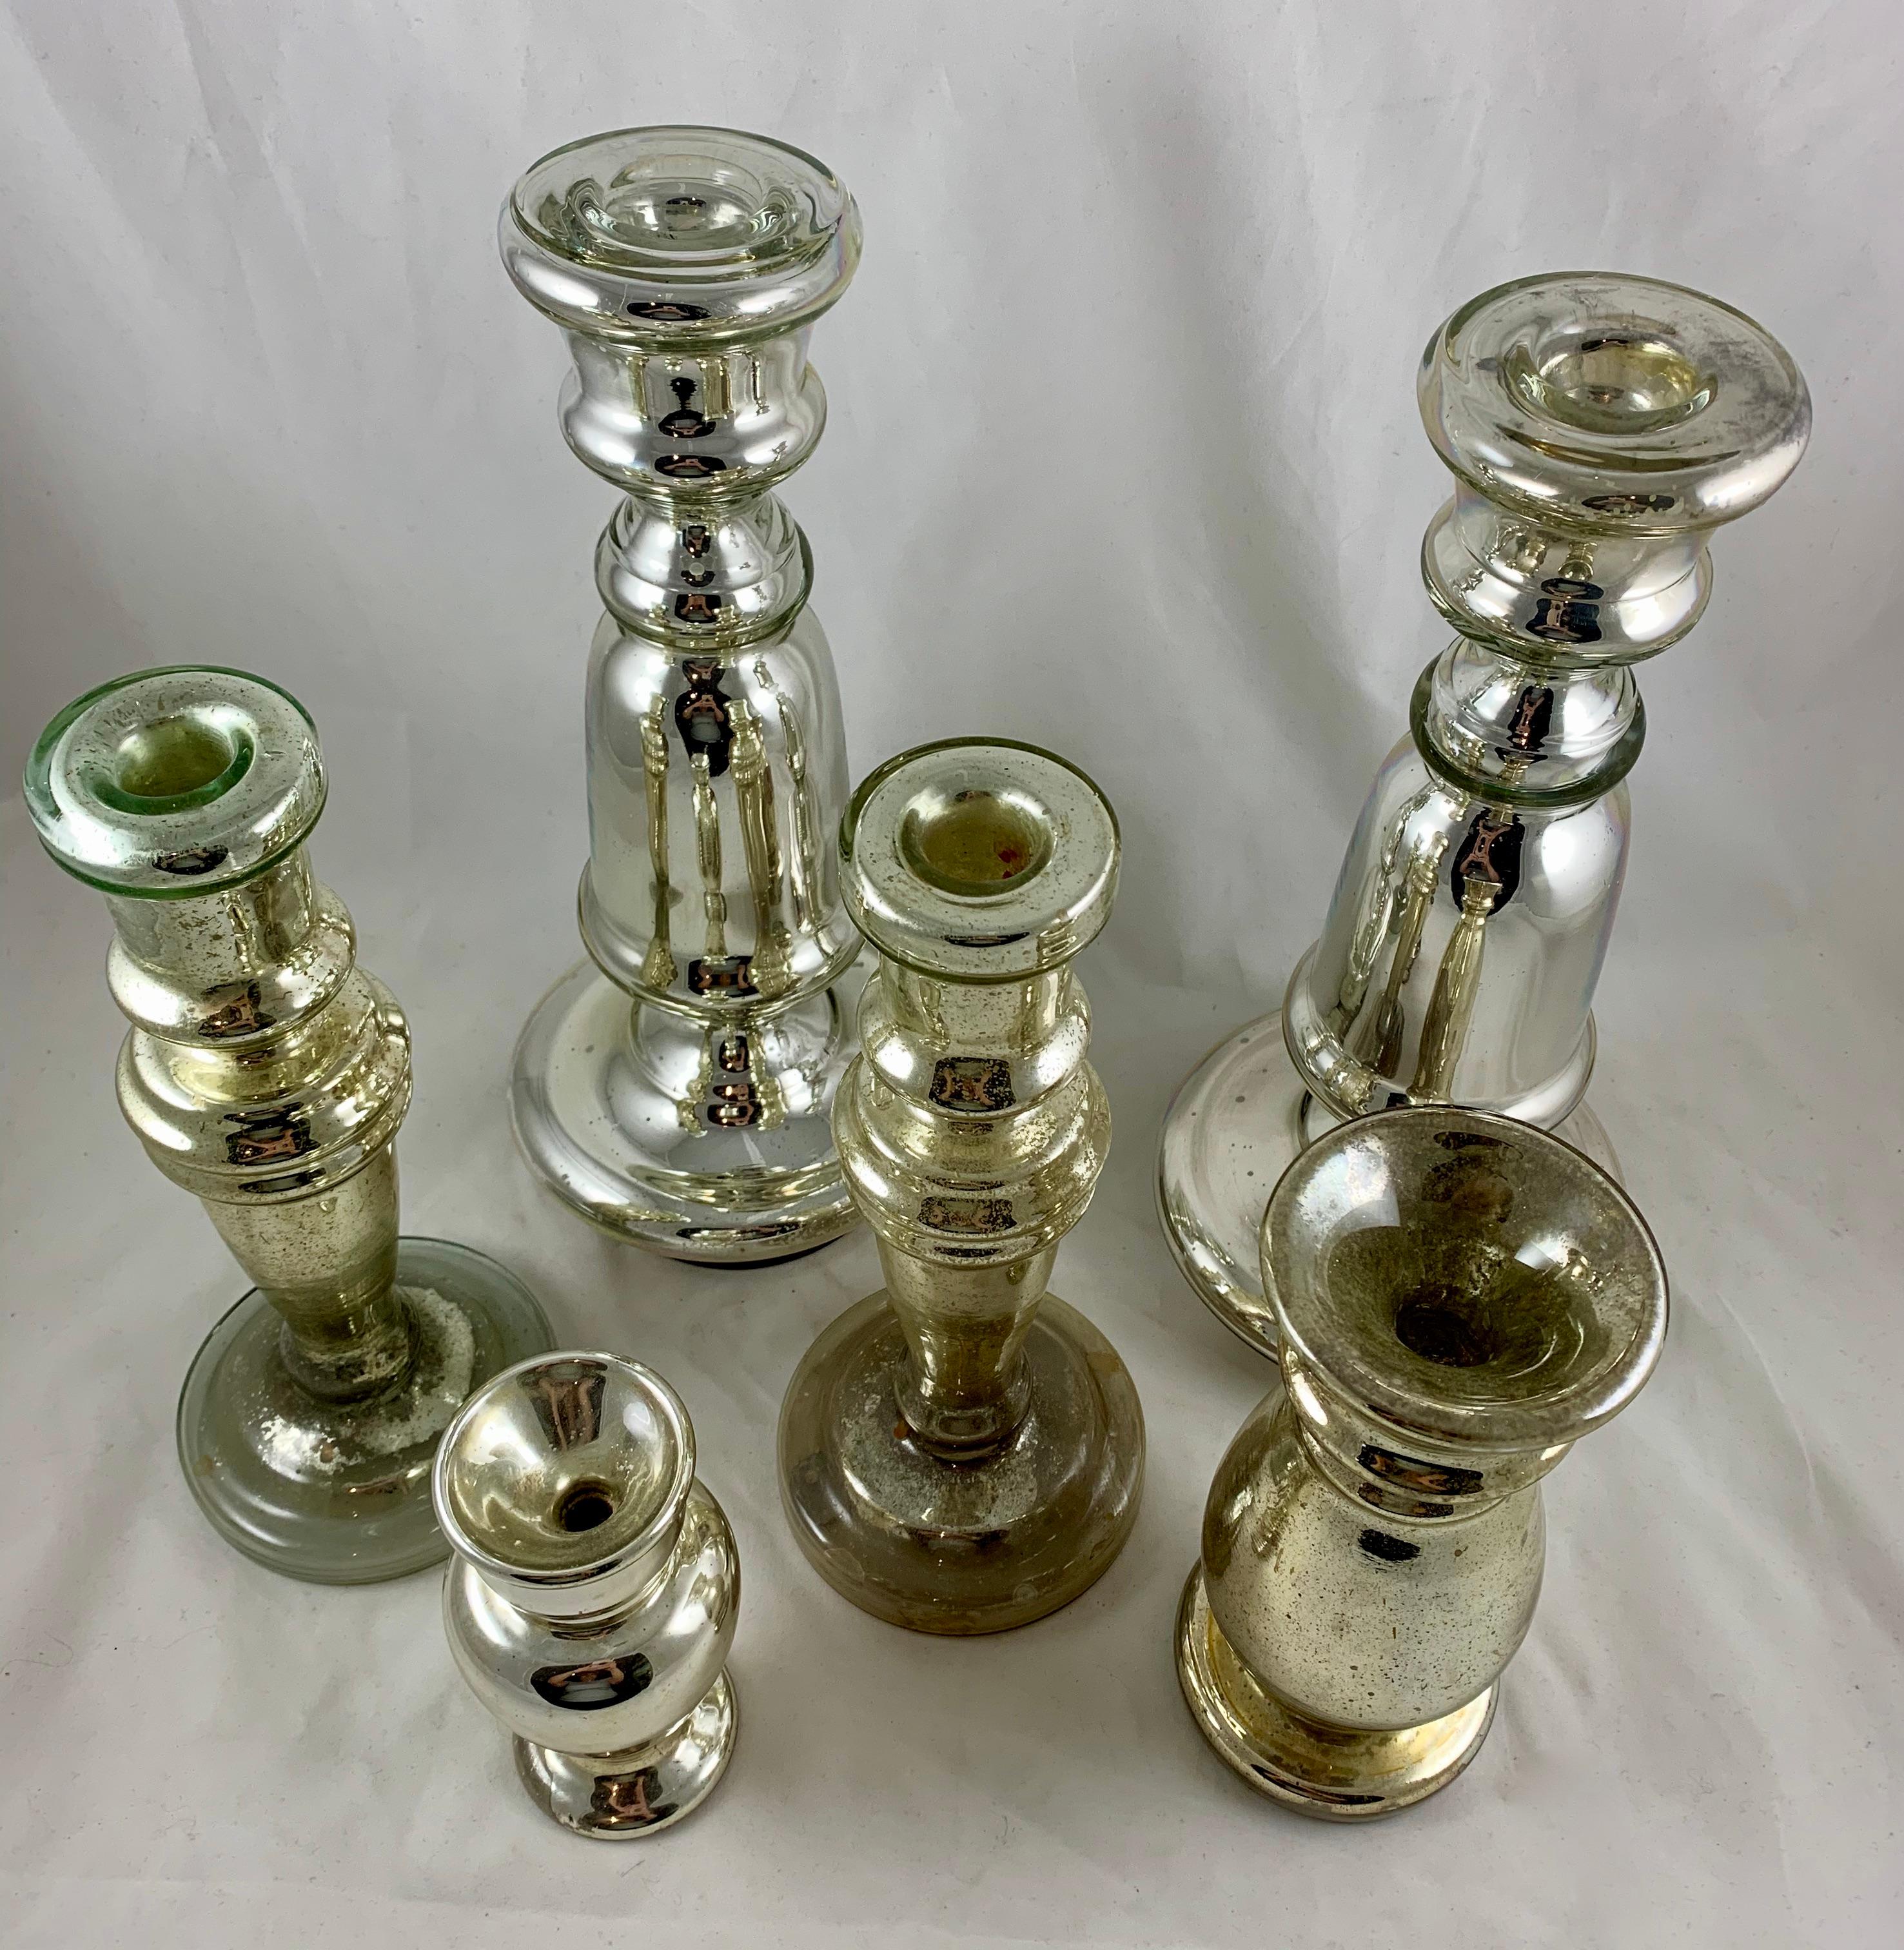 English Blown Mercury Glass Silvered Candlesticks, Collection of Six, circa 1850 In Good Condition For Sale In Philadelphia, PA